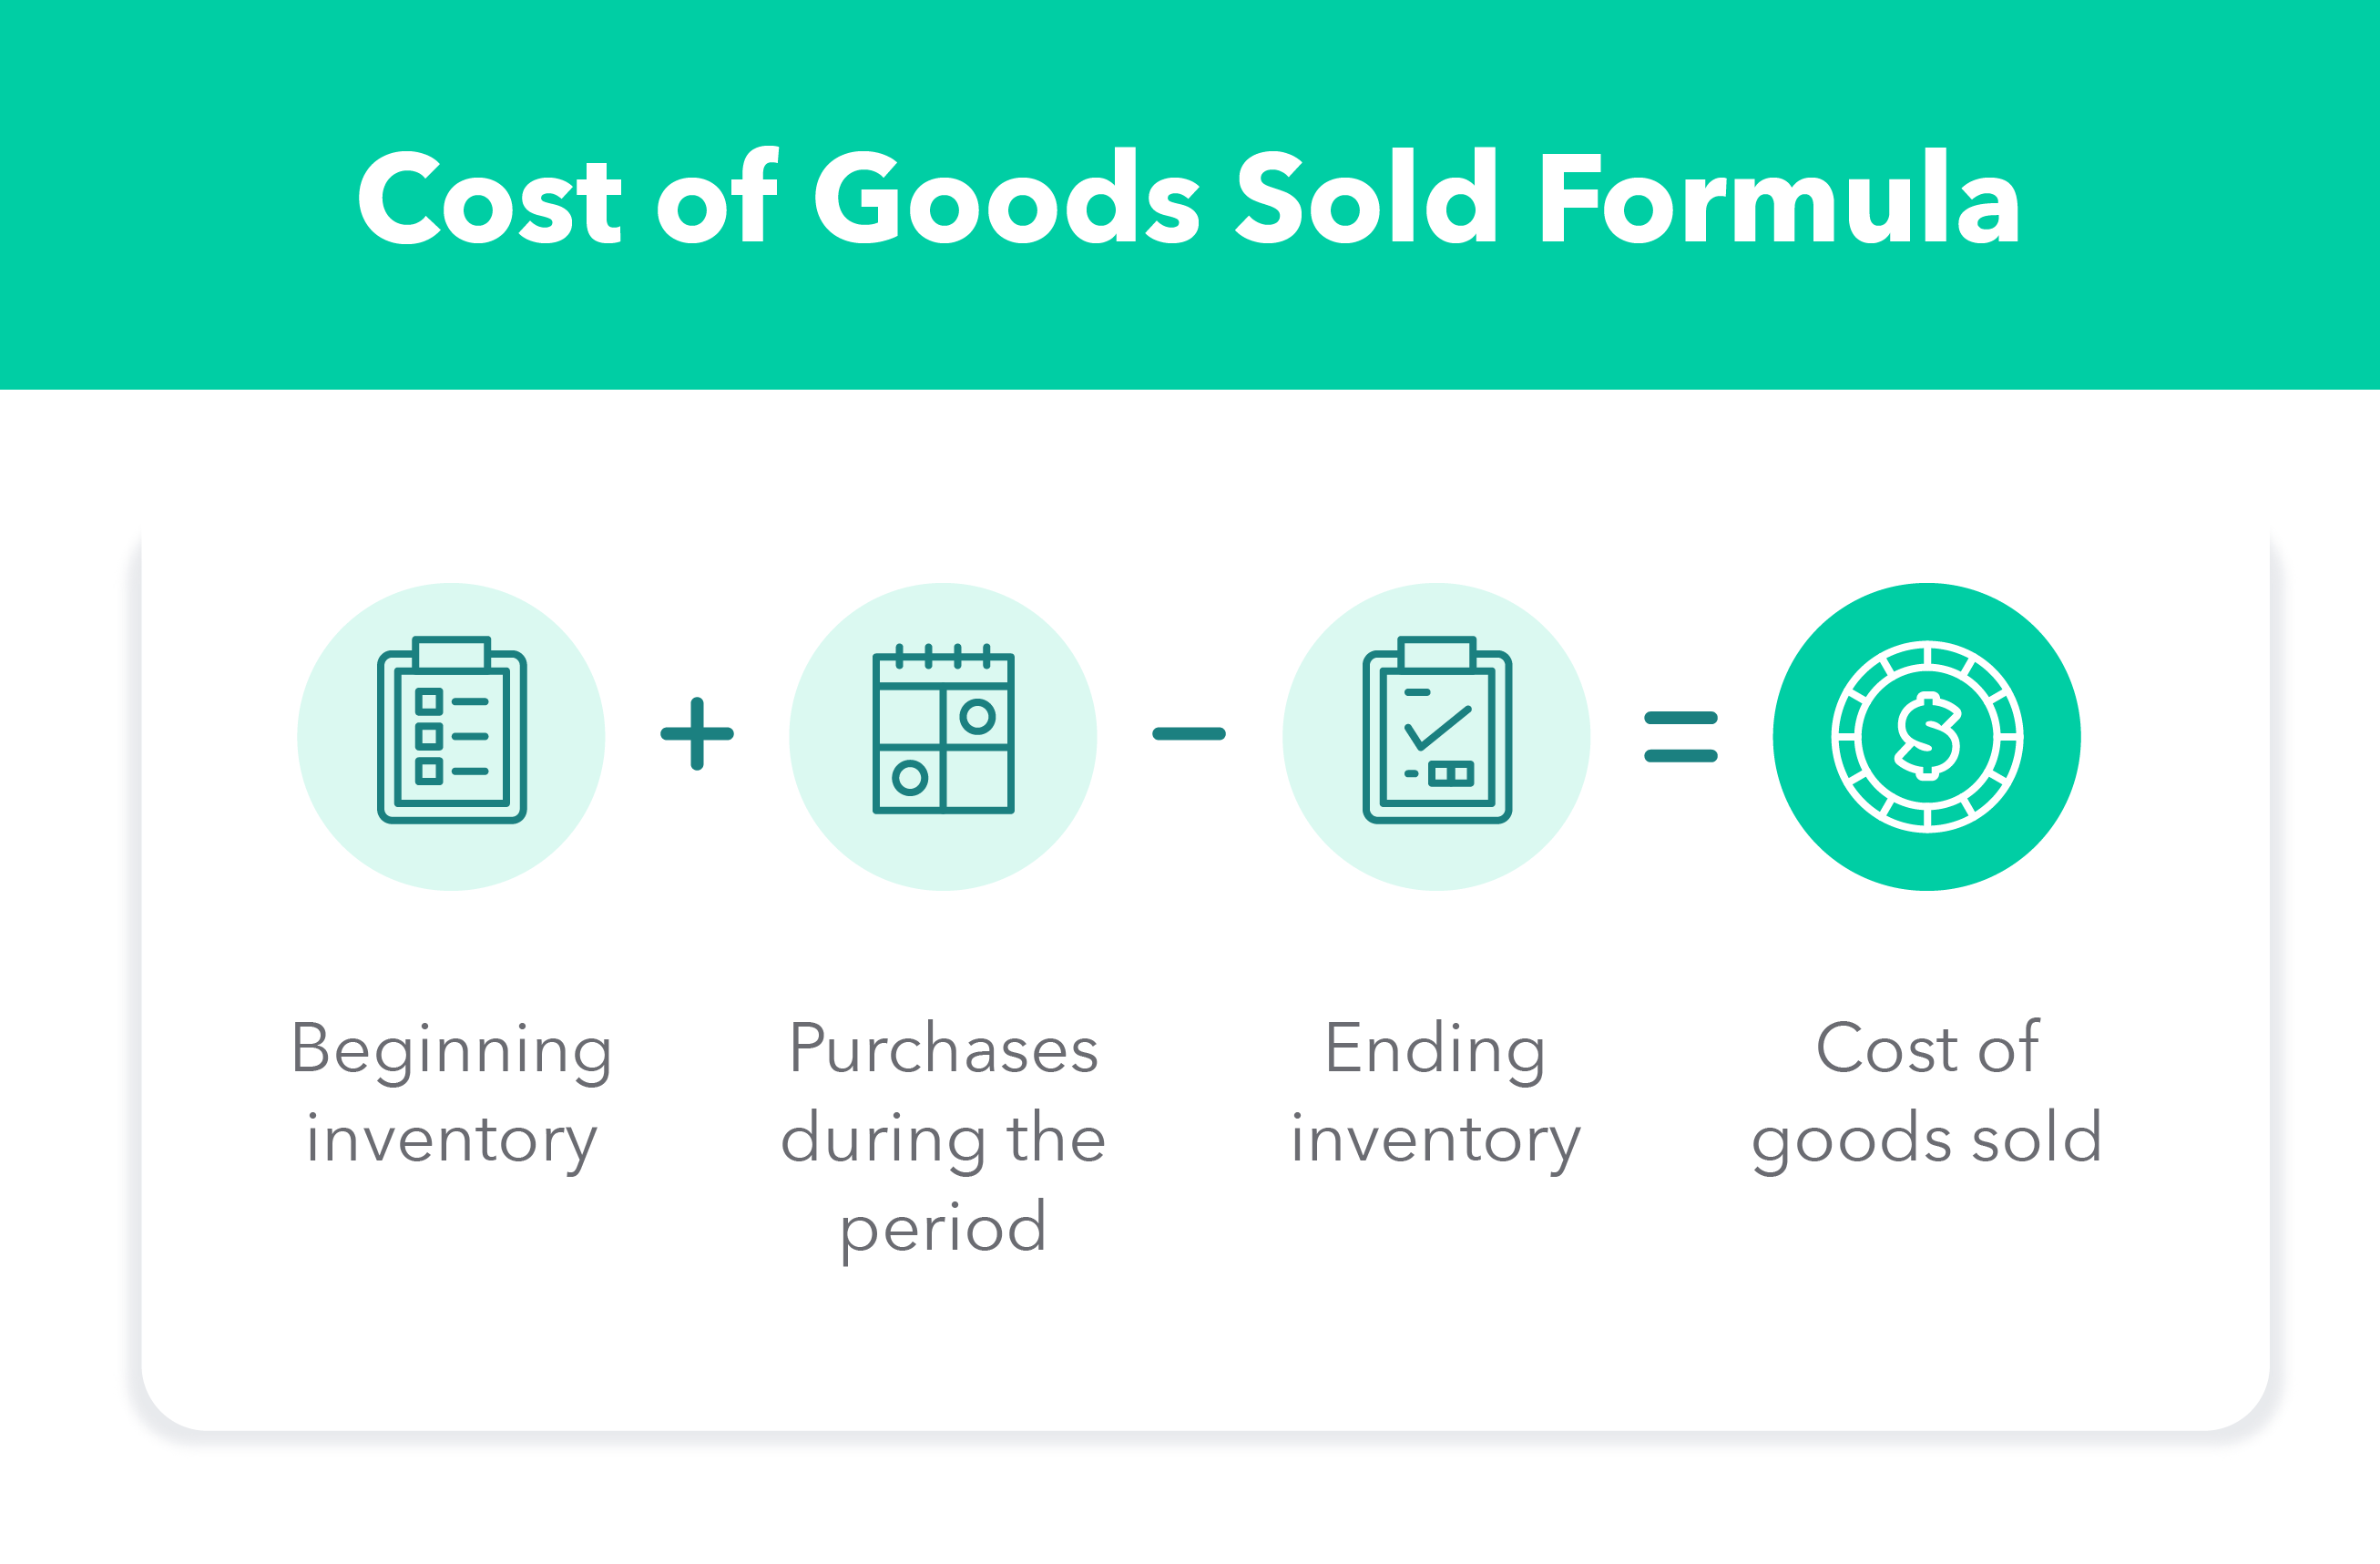 Four illustrations help explain the cost of goods sold formula, which accounts for beginning inventory, purchases, and ending inventory.